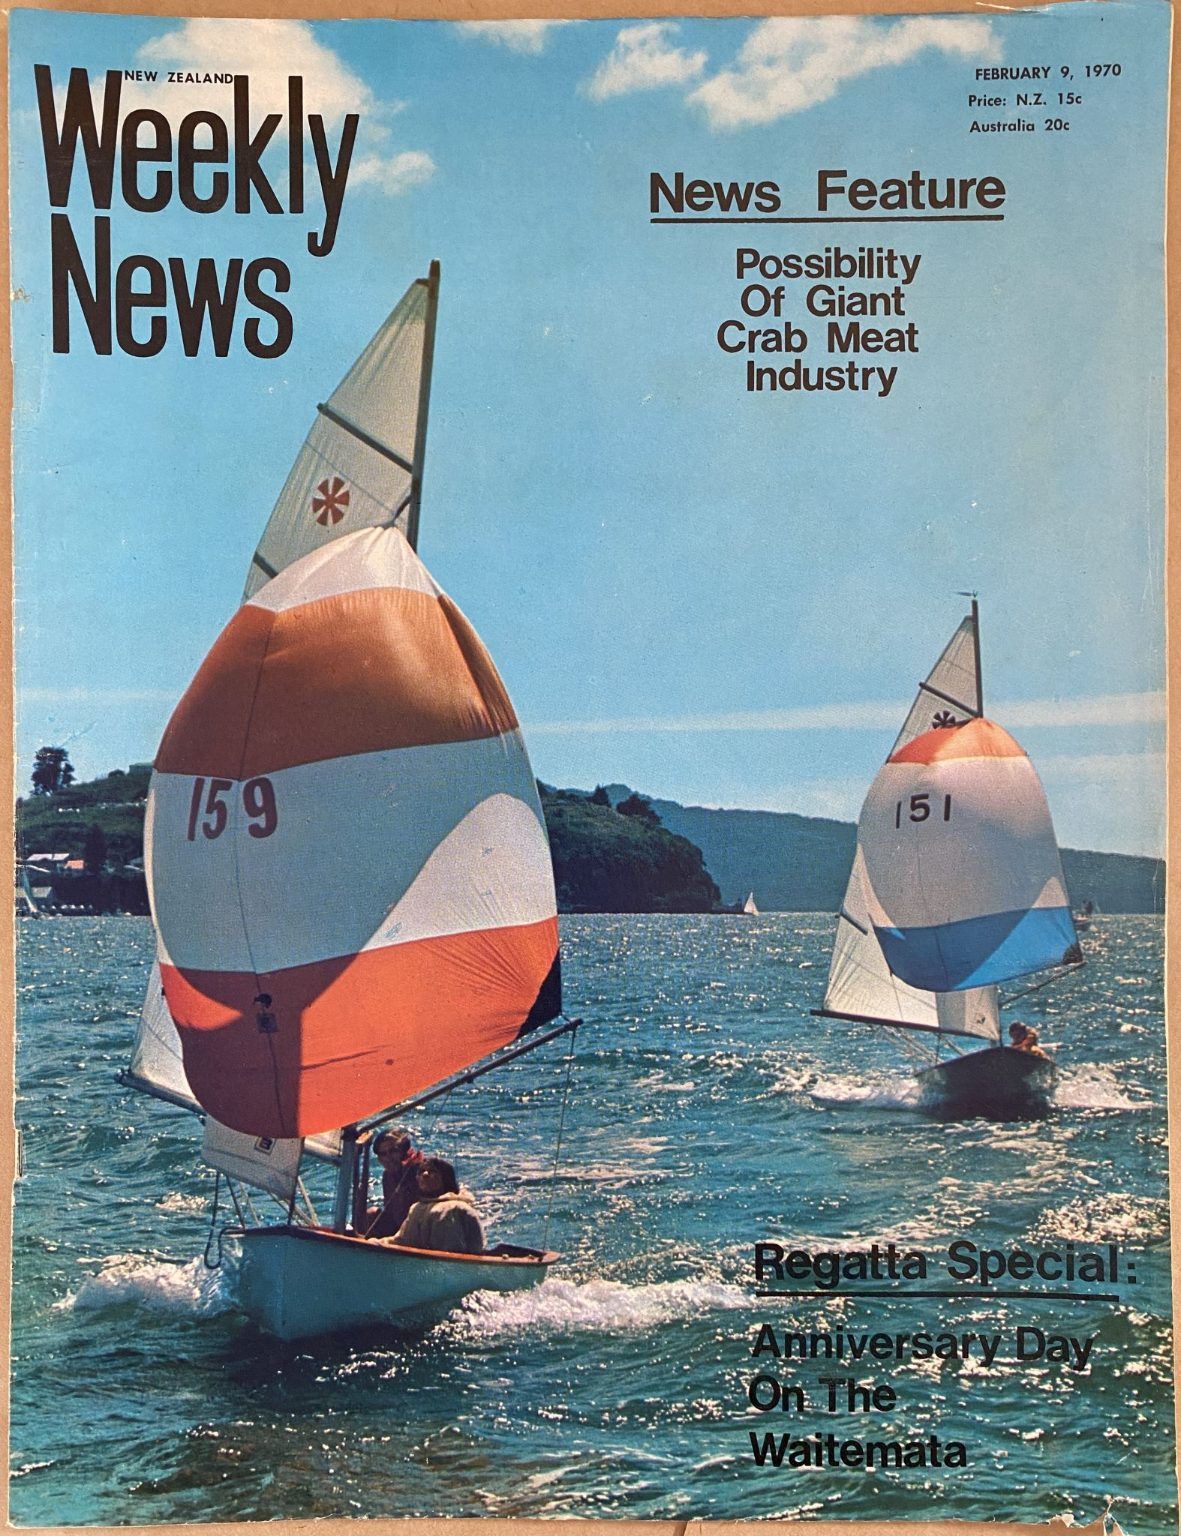 OLD NEWSPAPER: New Zealand Weekly News, No. 5541, 9 February 1970